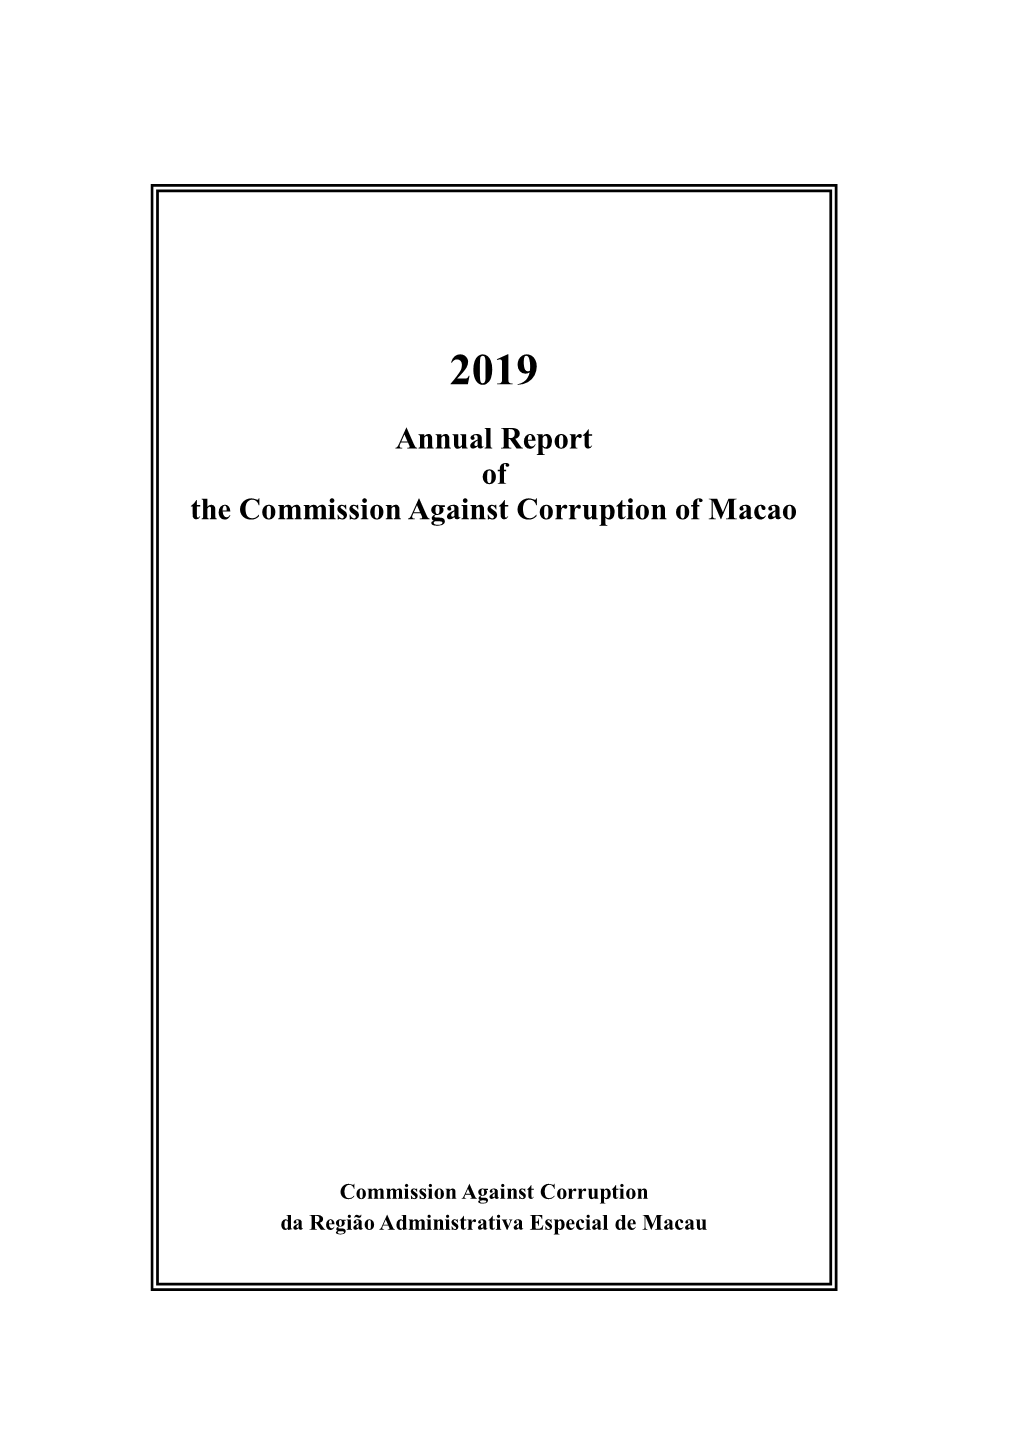 Annual Report of the Commission Against Corruption of Macao